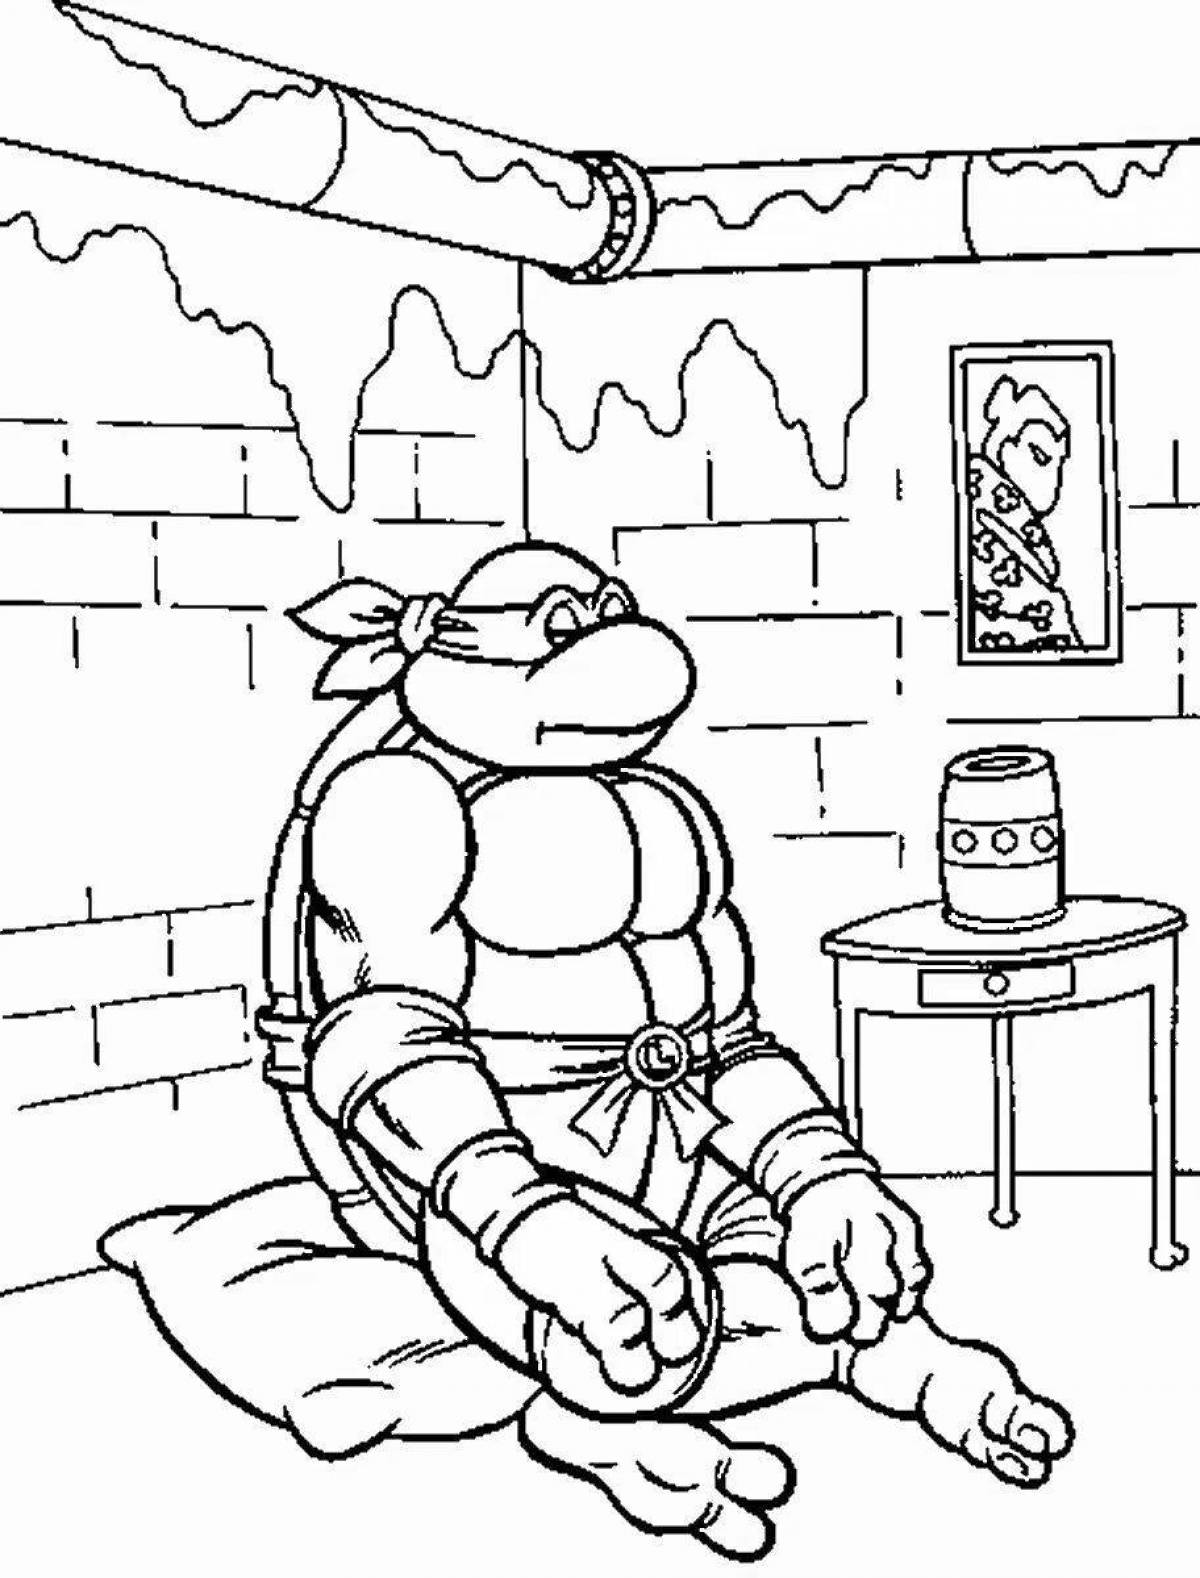 Cute ninja turtles coloring pages for kids